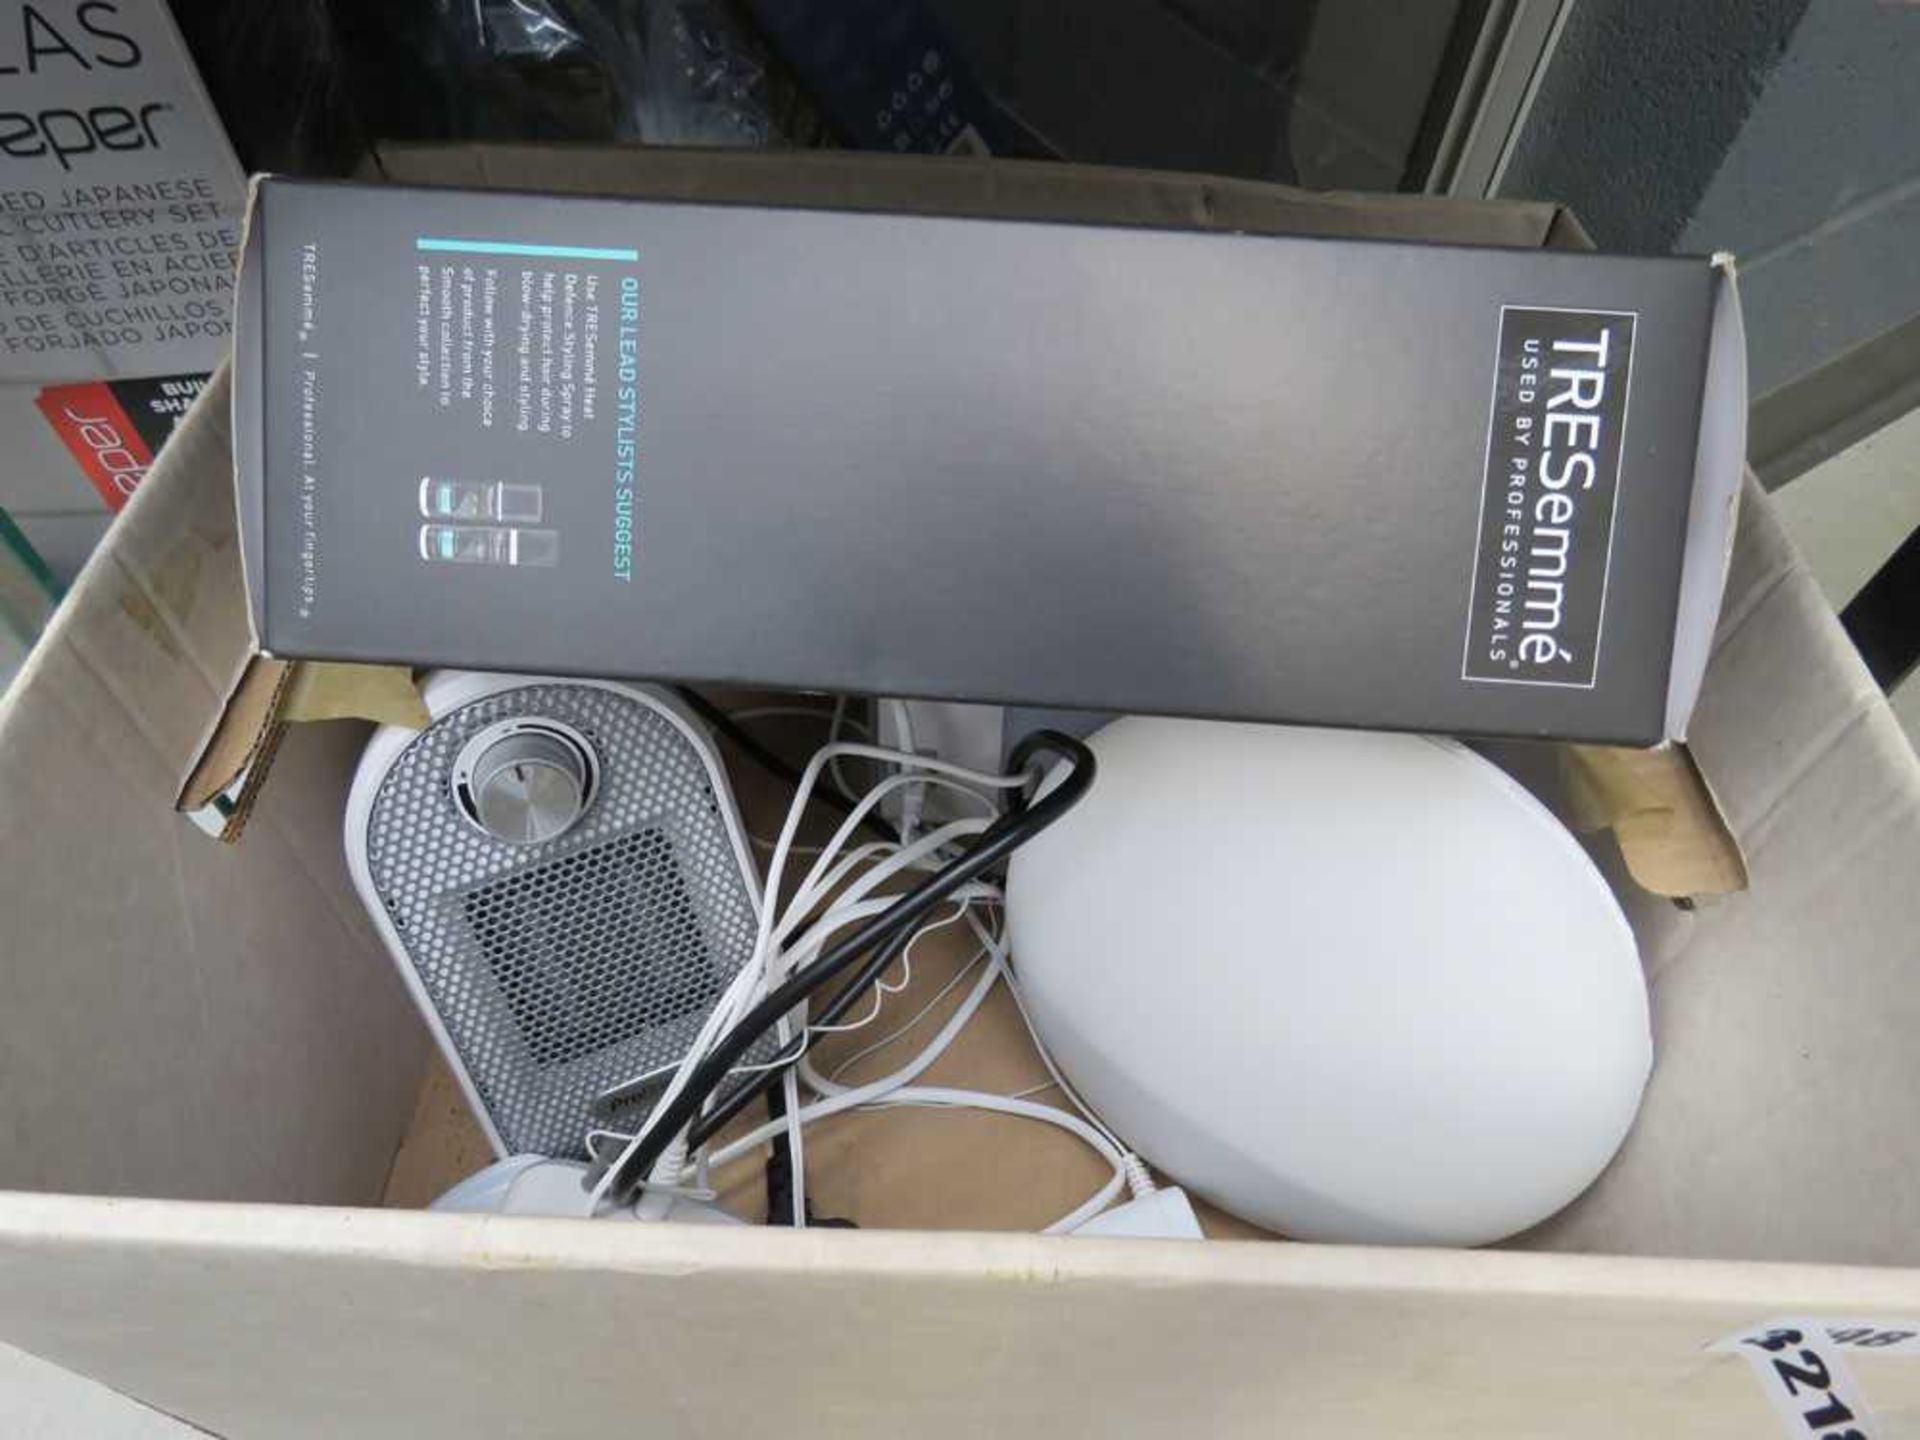 Tresemme hair dryer, 2 lamps and speaker